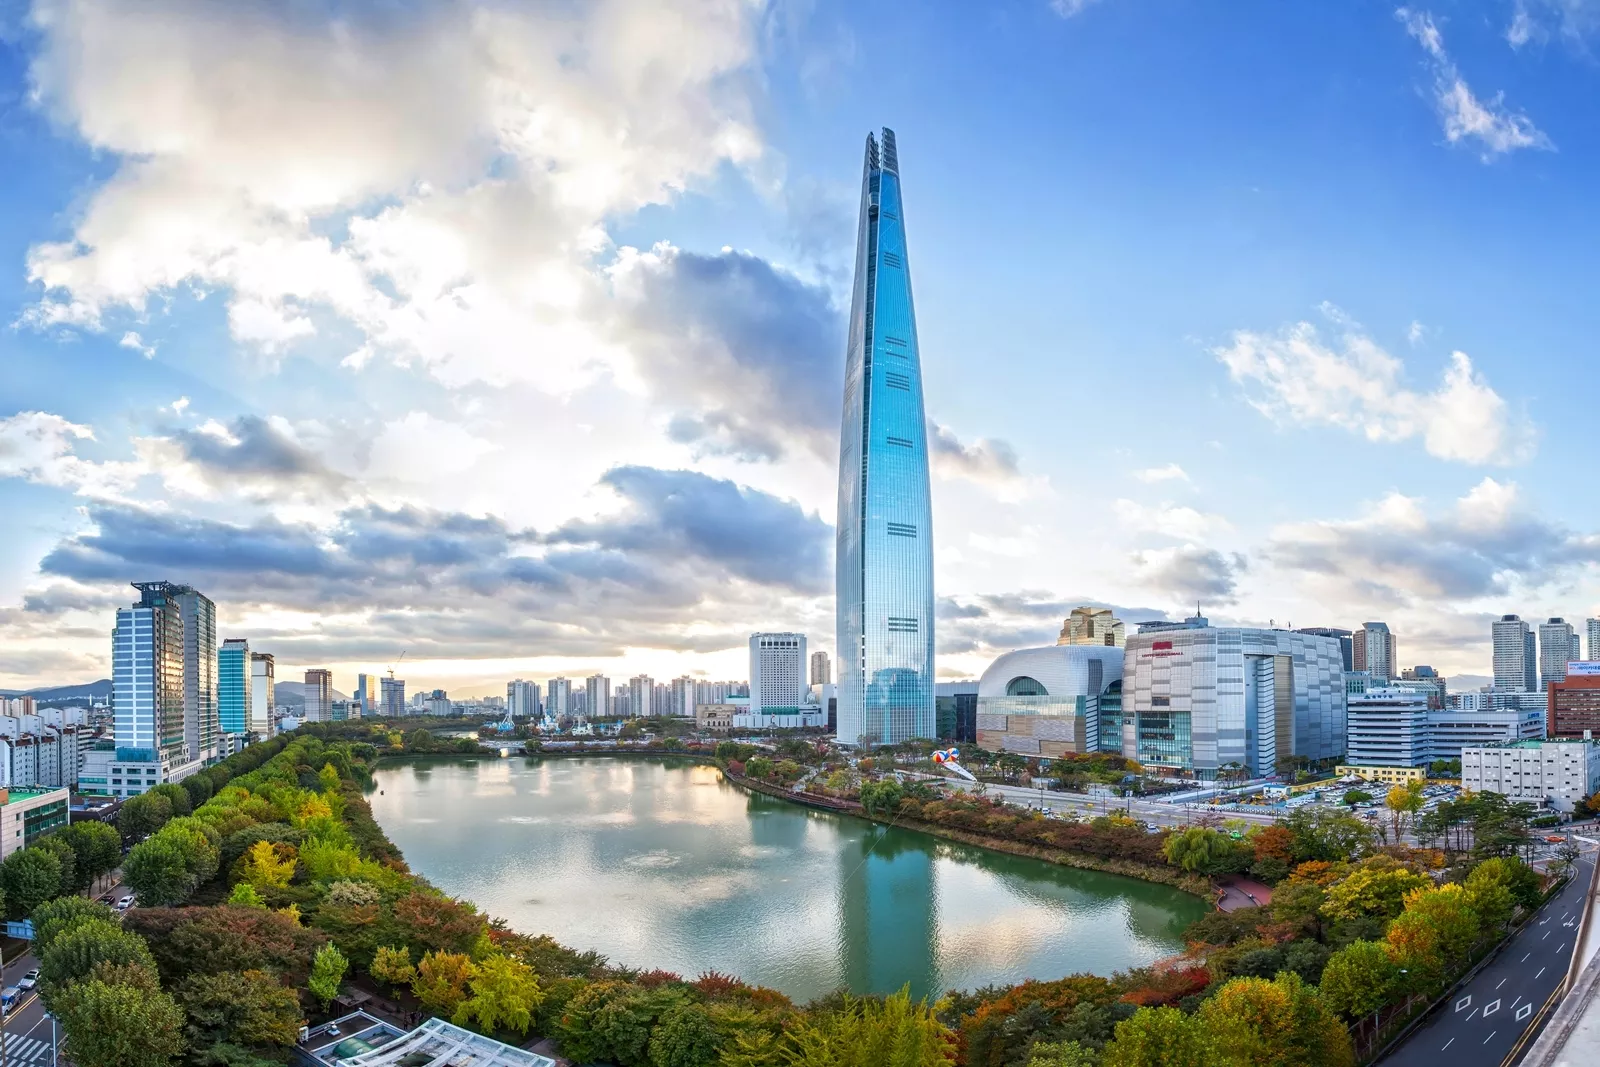 Lotte World Tower in South Korea, East Asia | Observation Decks - Rated 4.4